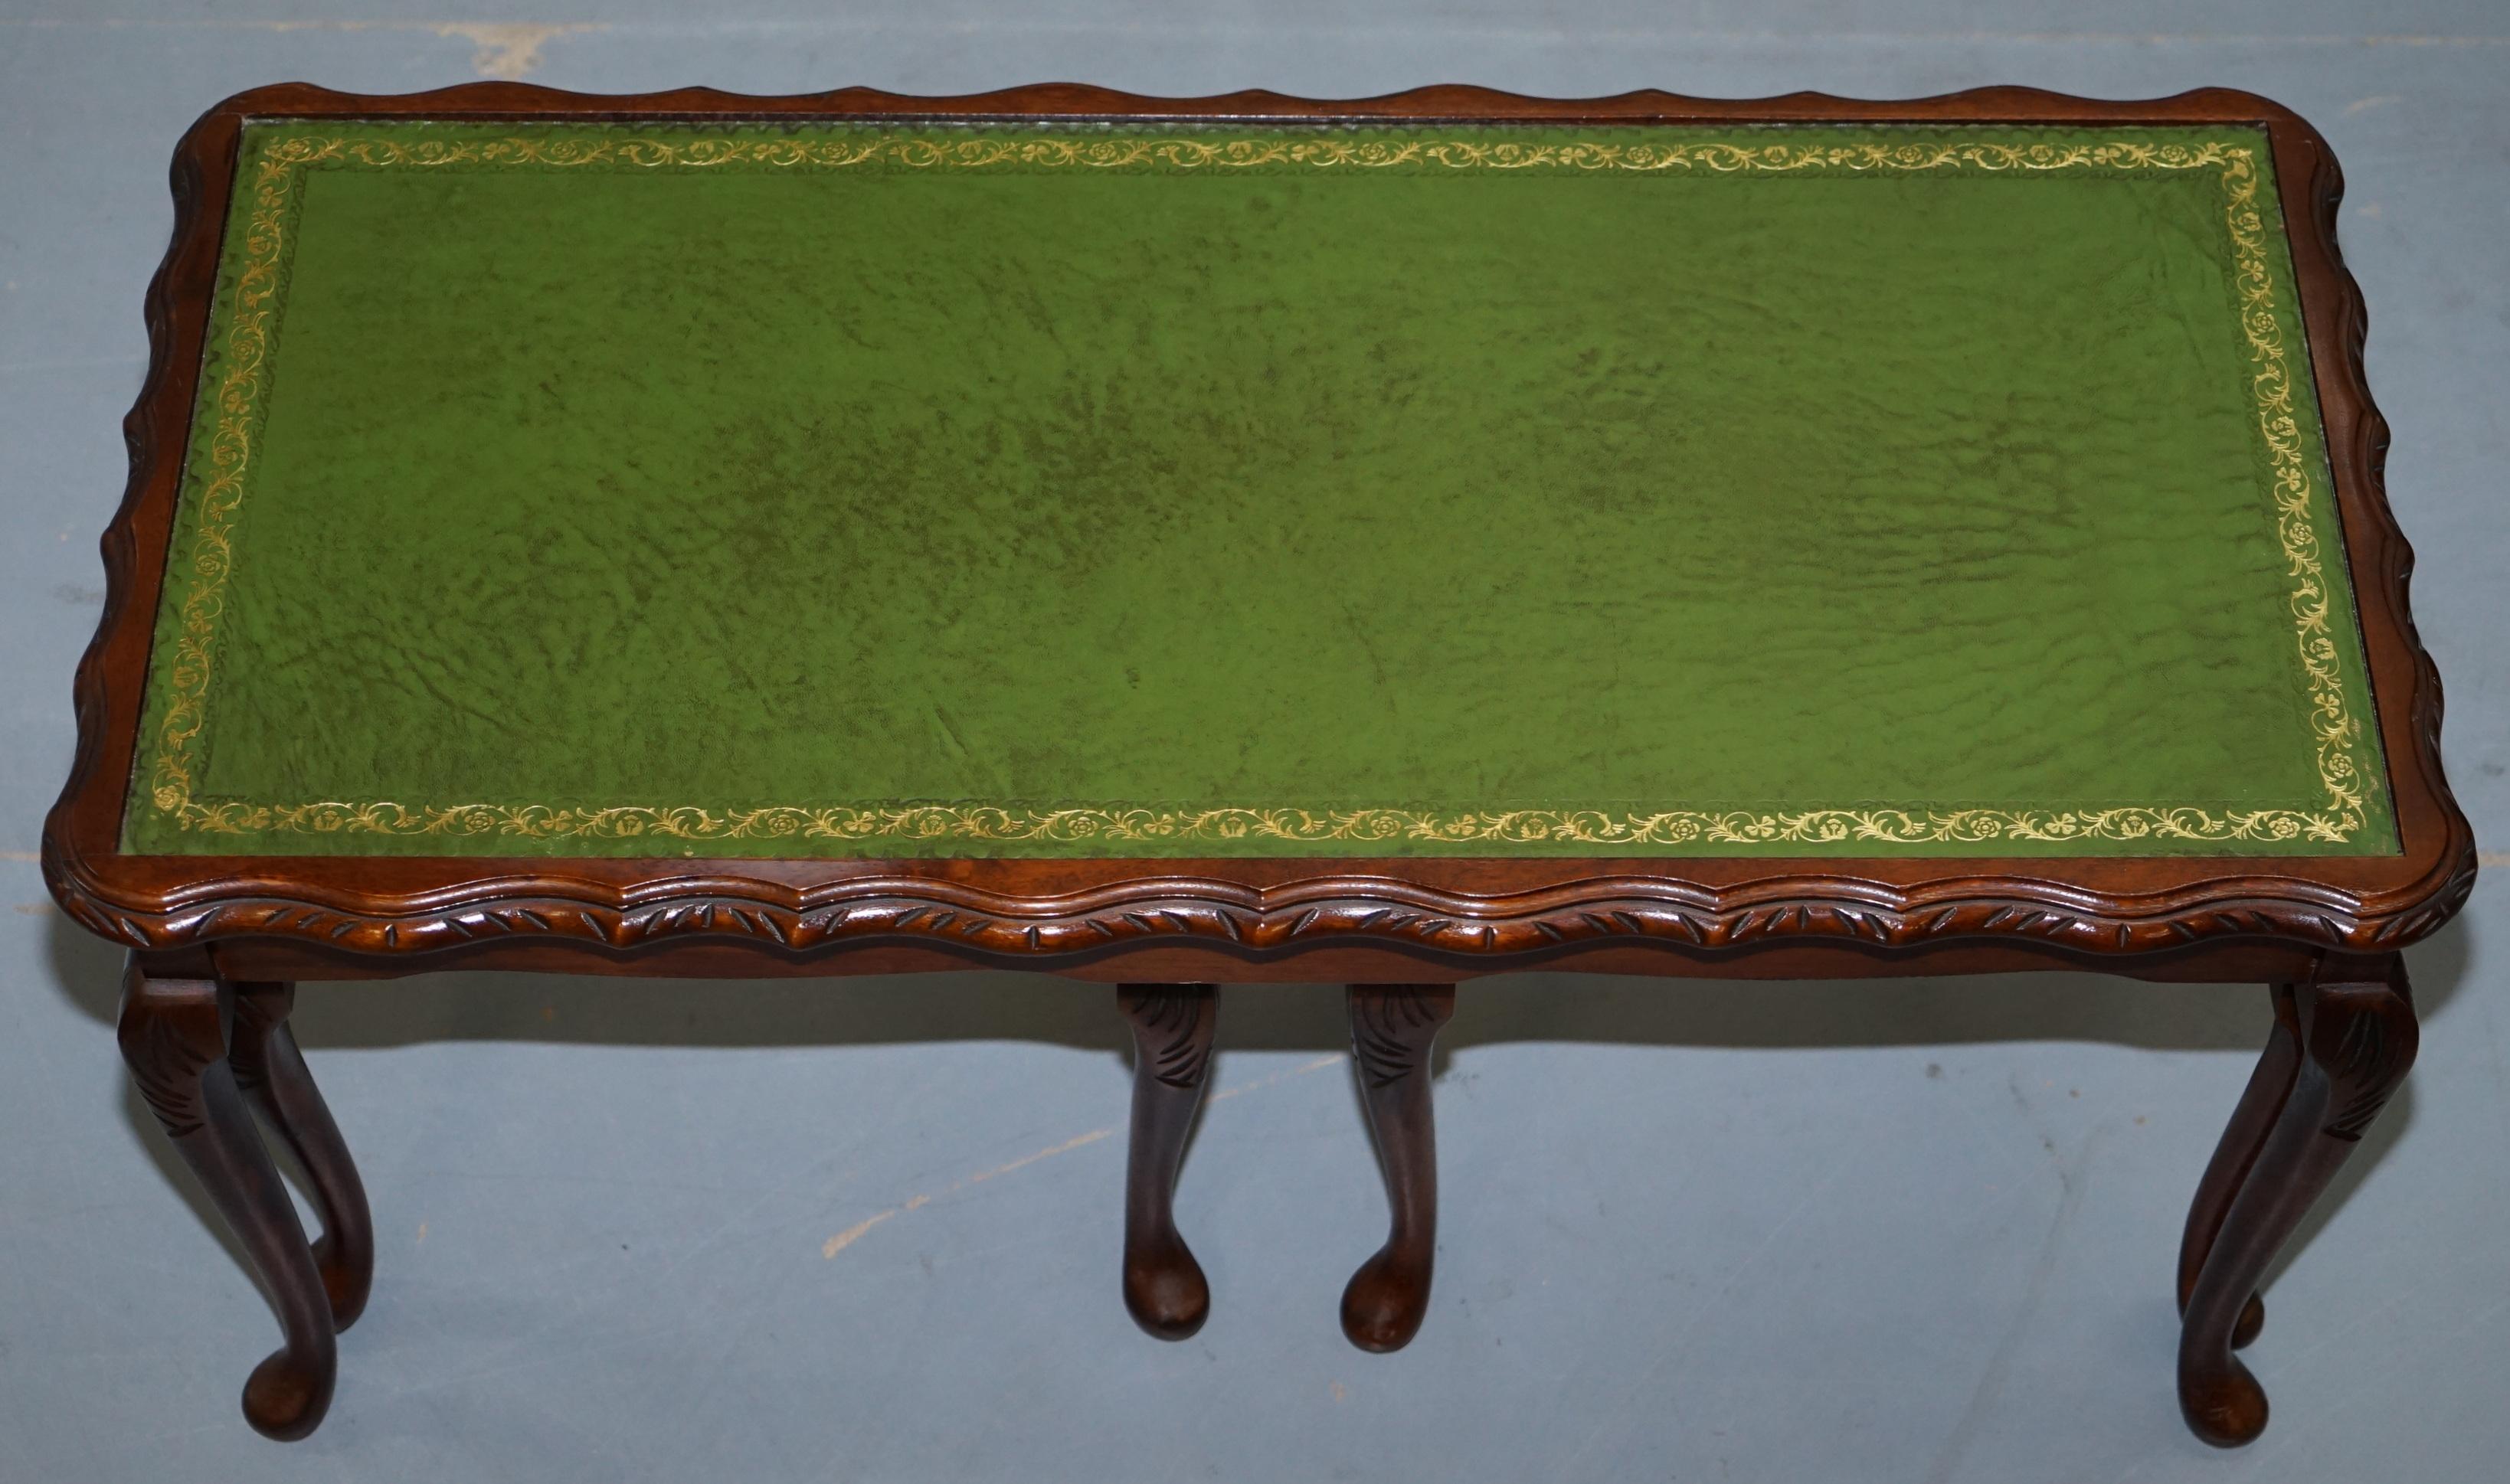 Modern Vintage Mahogany & Green Leather Topped Coffee Table Plus 2 Nest of Small Tables